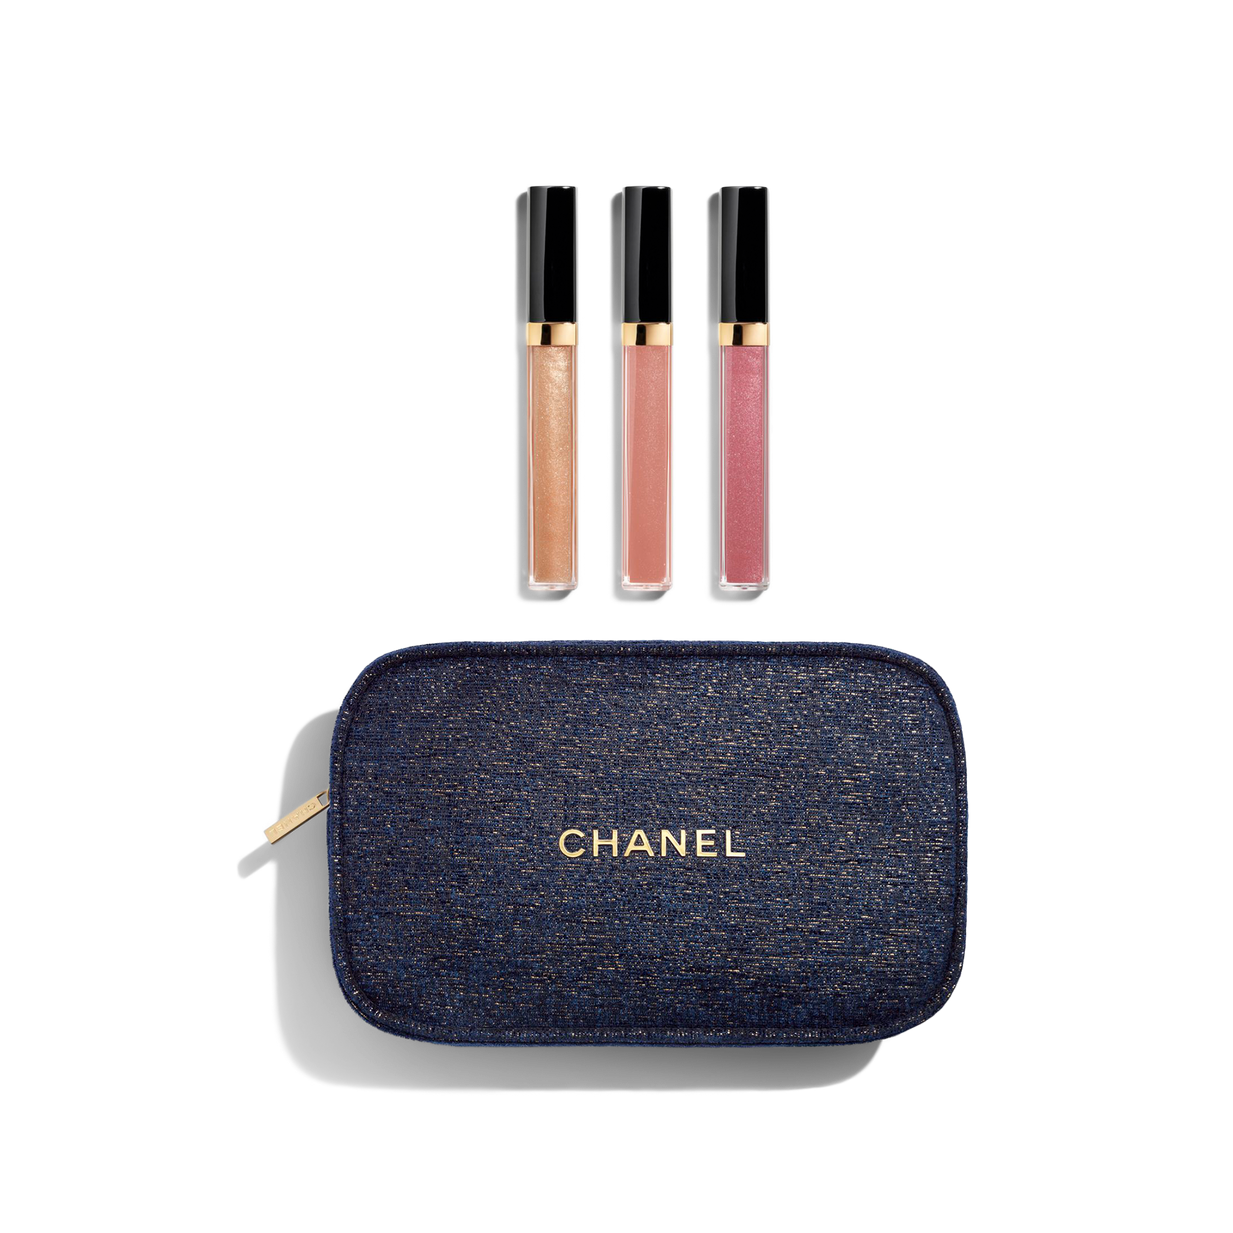 MAKEUP: CHANEL HOLIDAY SETS Lipgloss Trio, On-the-go moisture set, & t